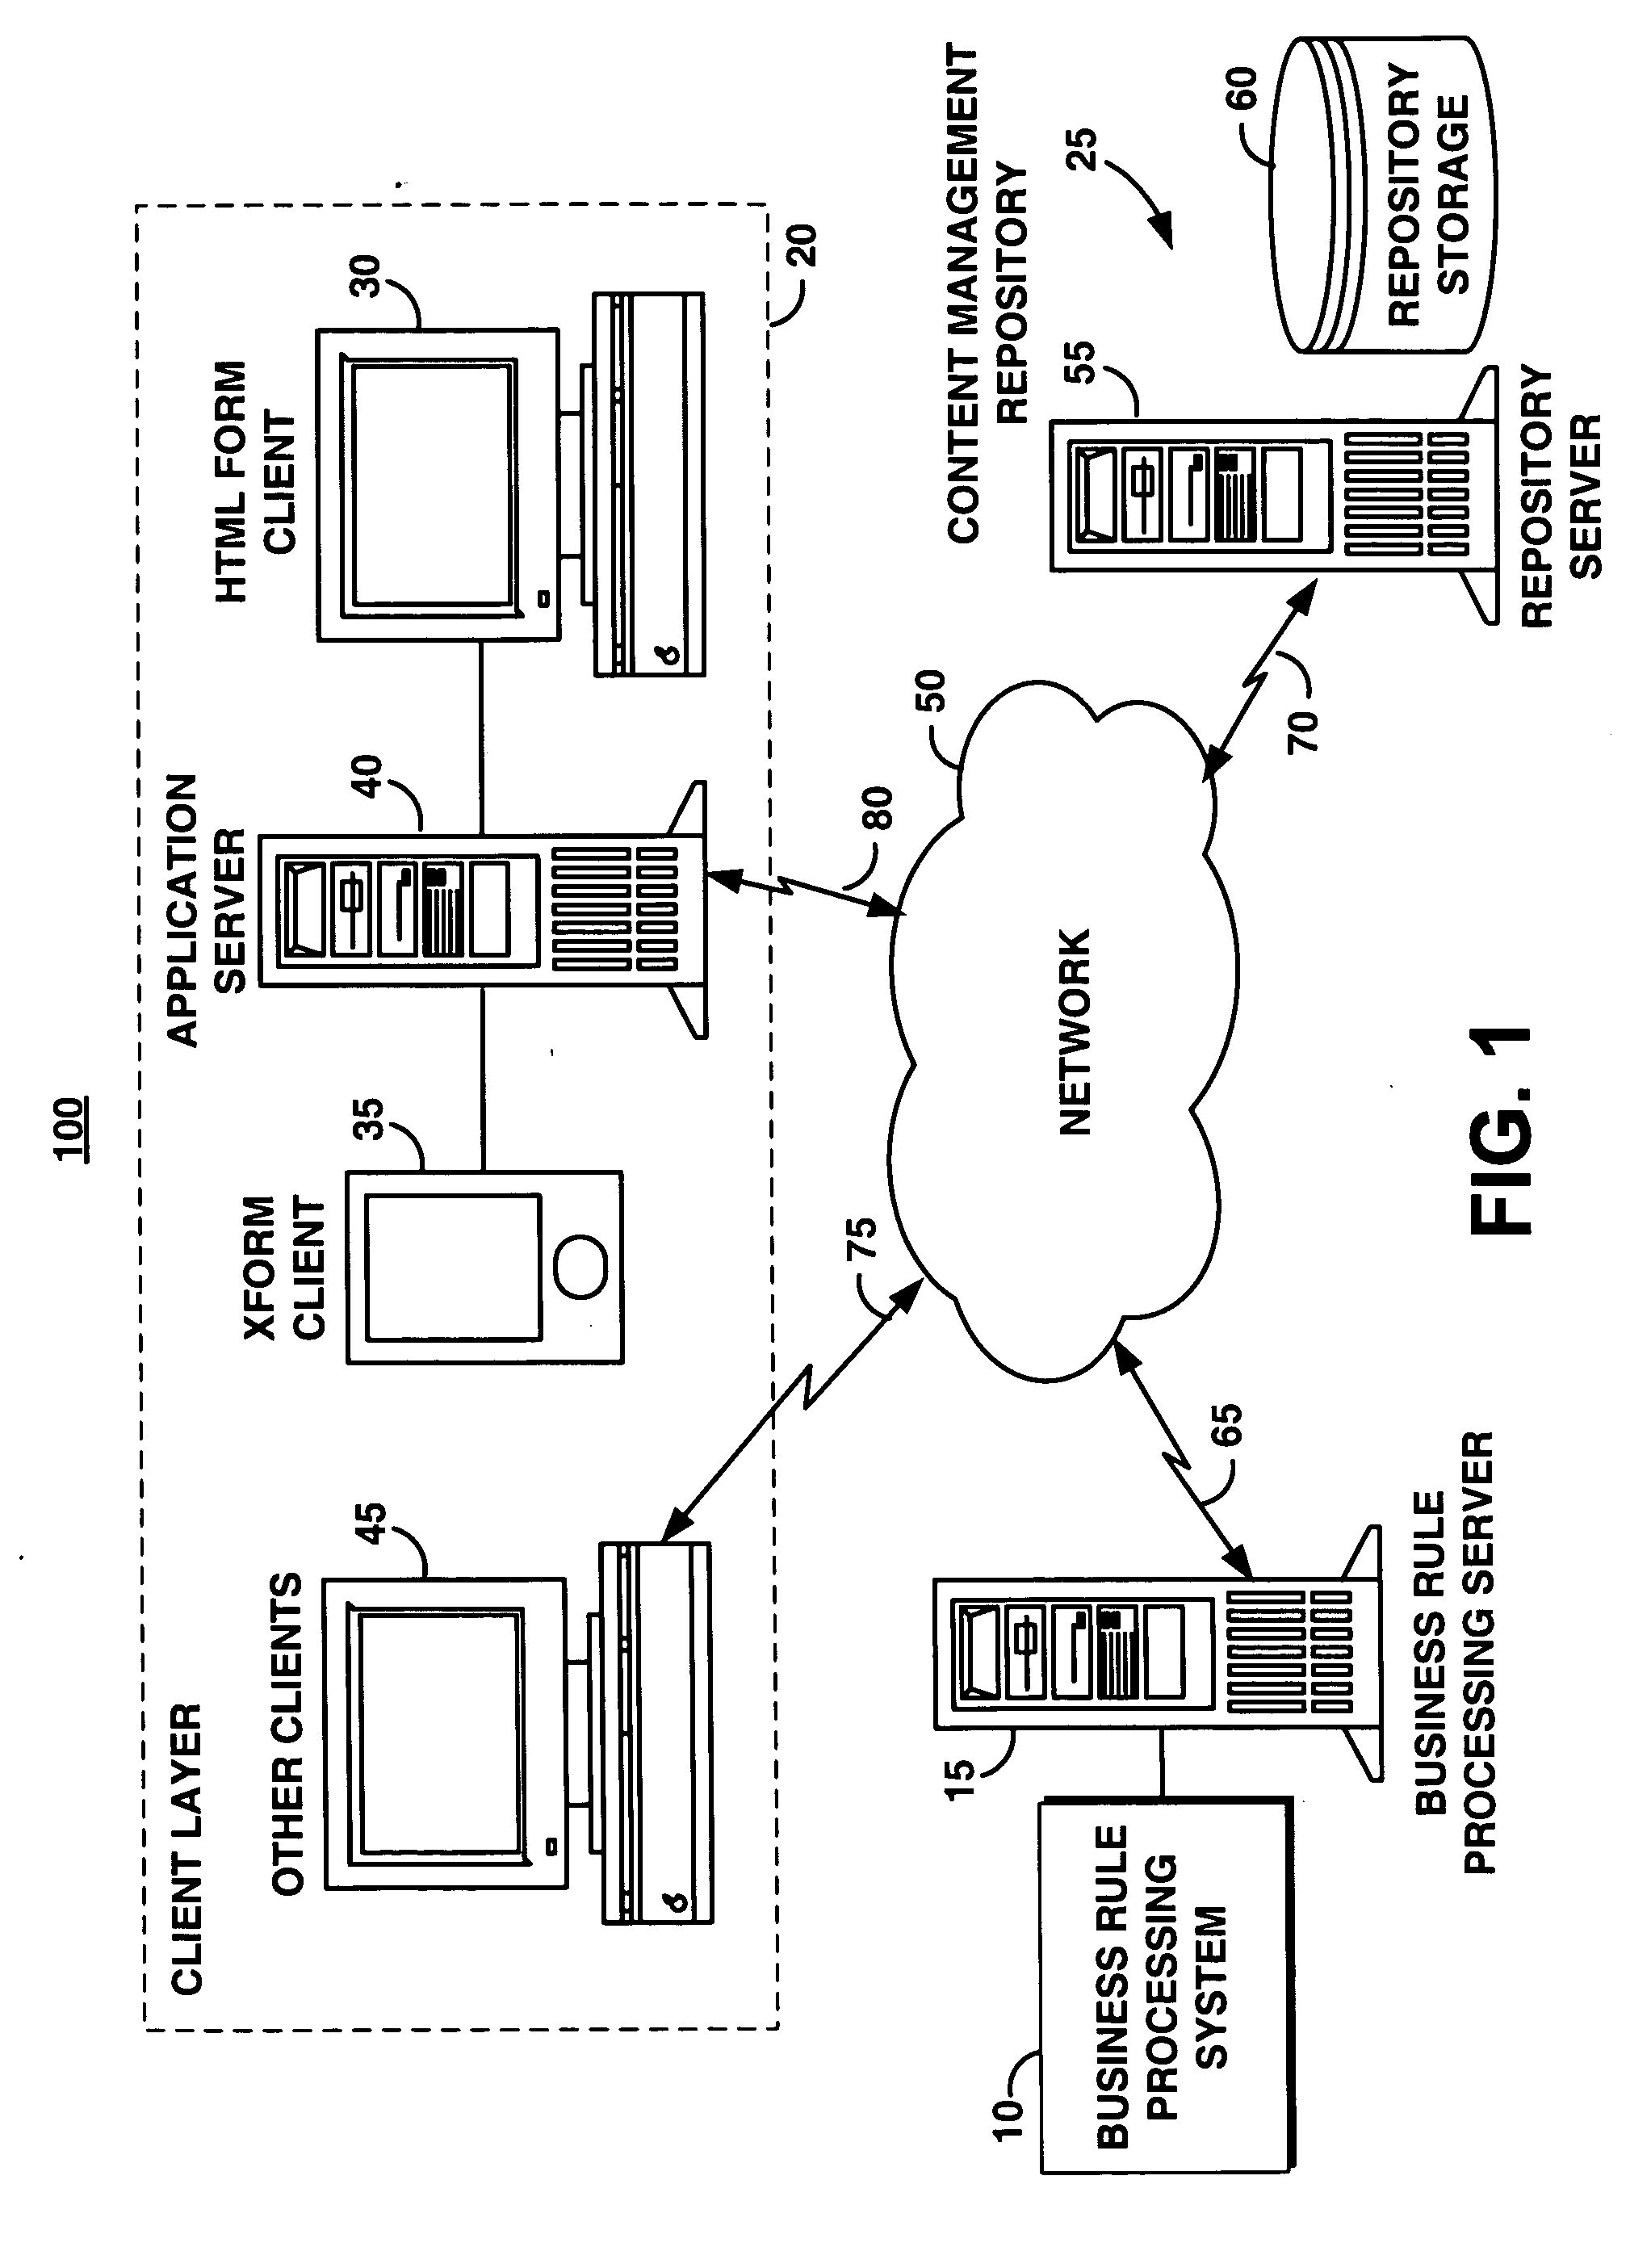 System and method for automatically processing dynamic business rules in a content management system